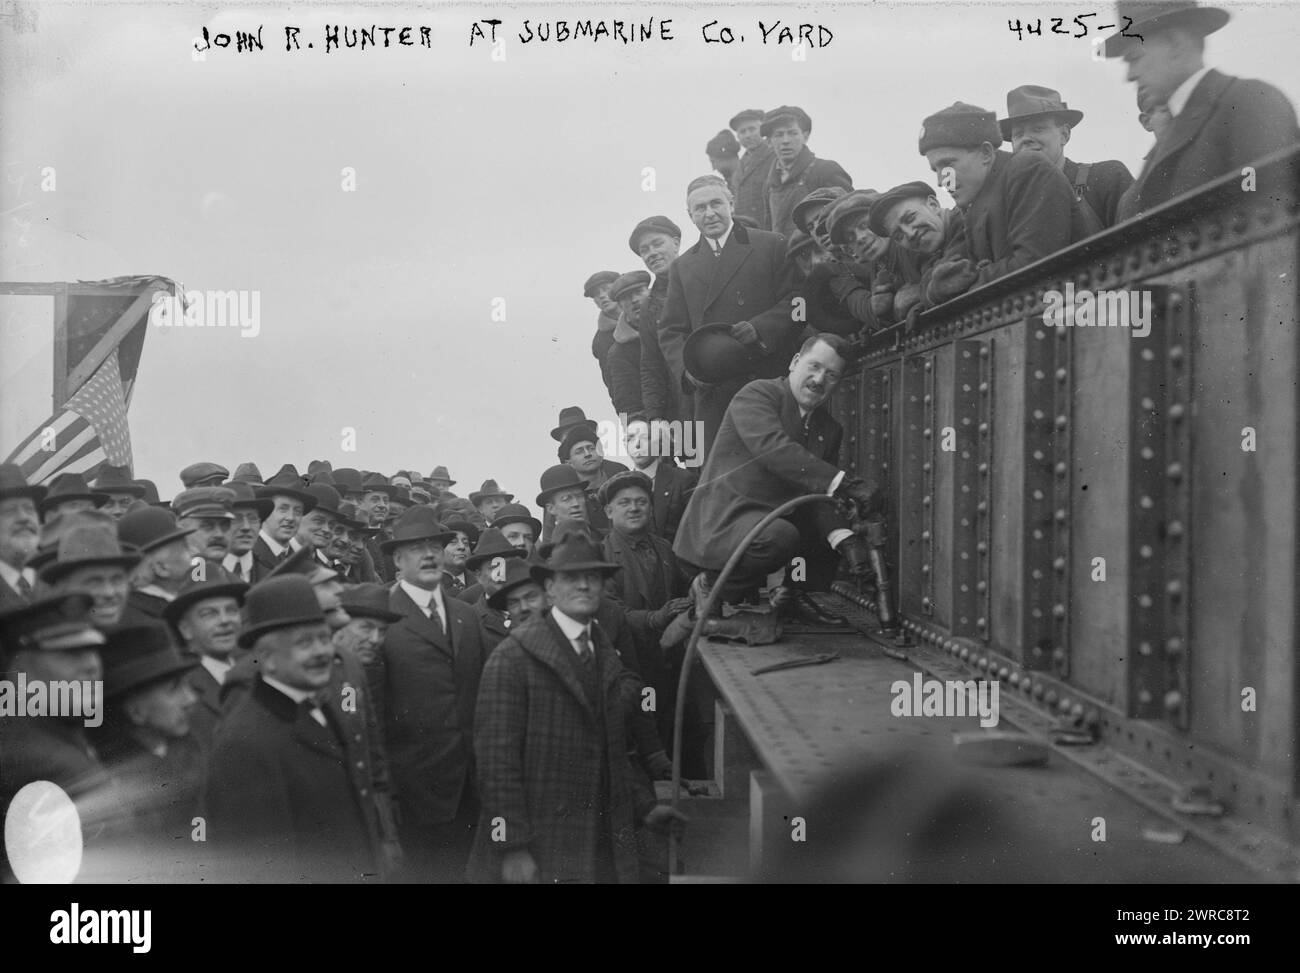 John R. Hunter at submarine Co. Yard, Photograph shows Mr. John Hunter of the United States Shipping Board, driving a rivet with Mr. Henry R. Sutphen, vice president of the Submarine Boat Corporation standing behind him at the Newark Bay Shipyard, Kearny, New Jersey. The men were attending a ceremony on December 20, 1917 marking the first rivet driven into 'the first standardized structural steel ship ever built.', 1917 Dec. 20, Glass negatives, 1 negative: glass Stock Photo